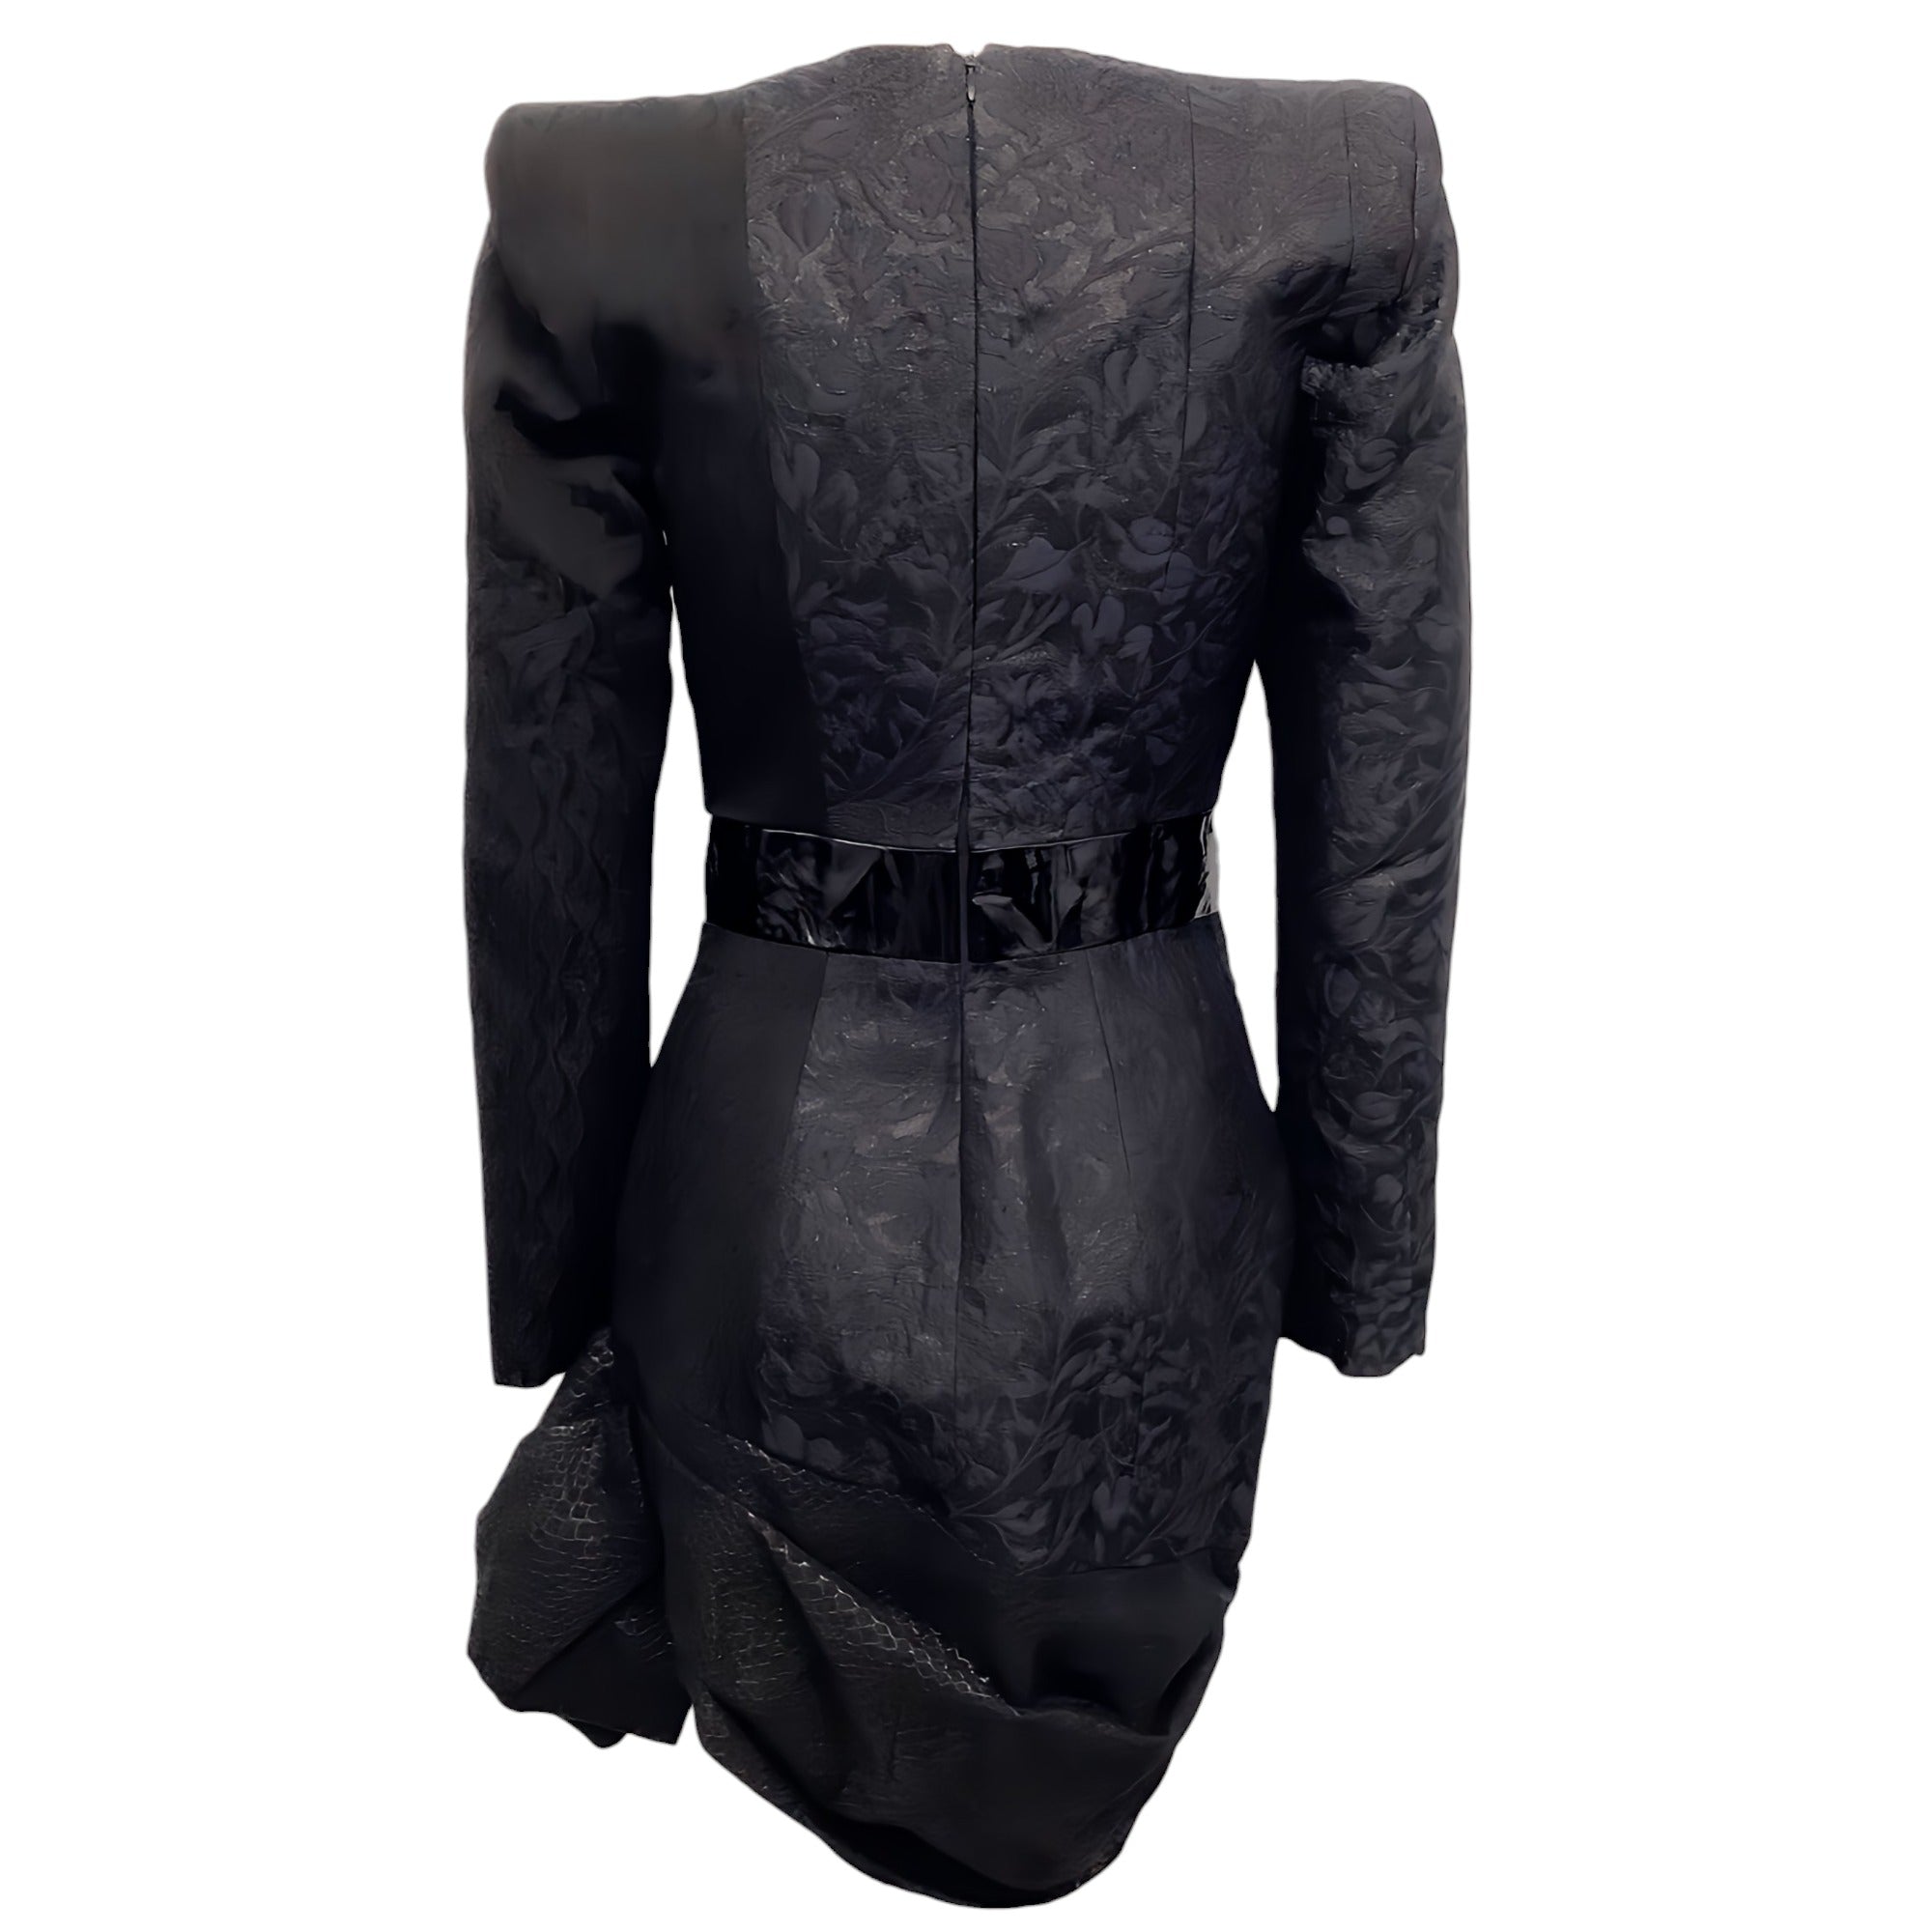 RVDK Limited Edition Black Jacquard Dress with Patent Leather